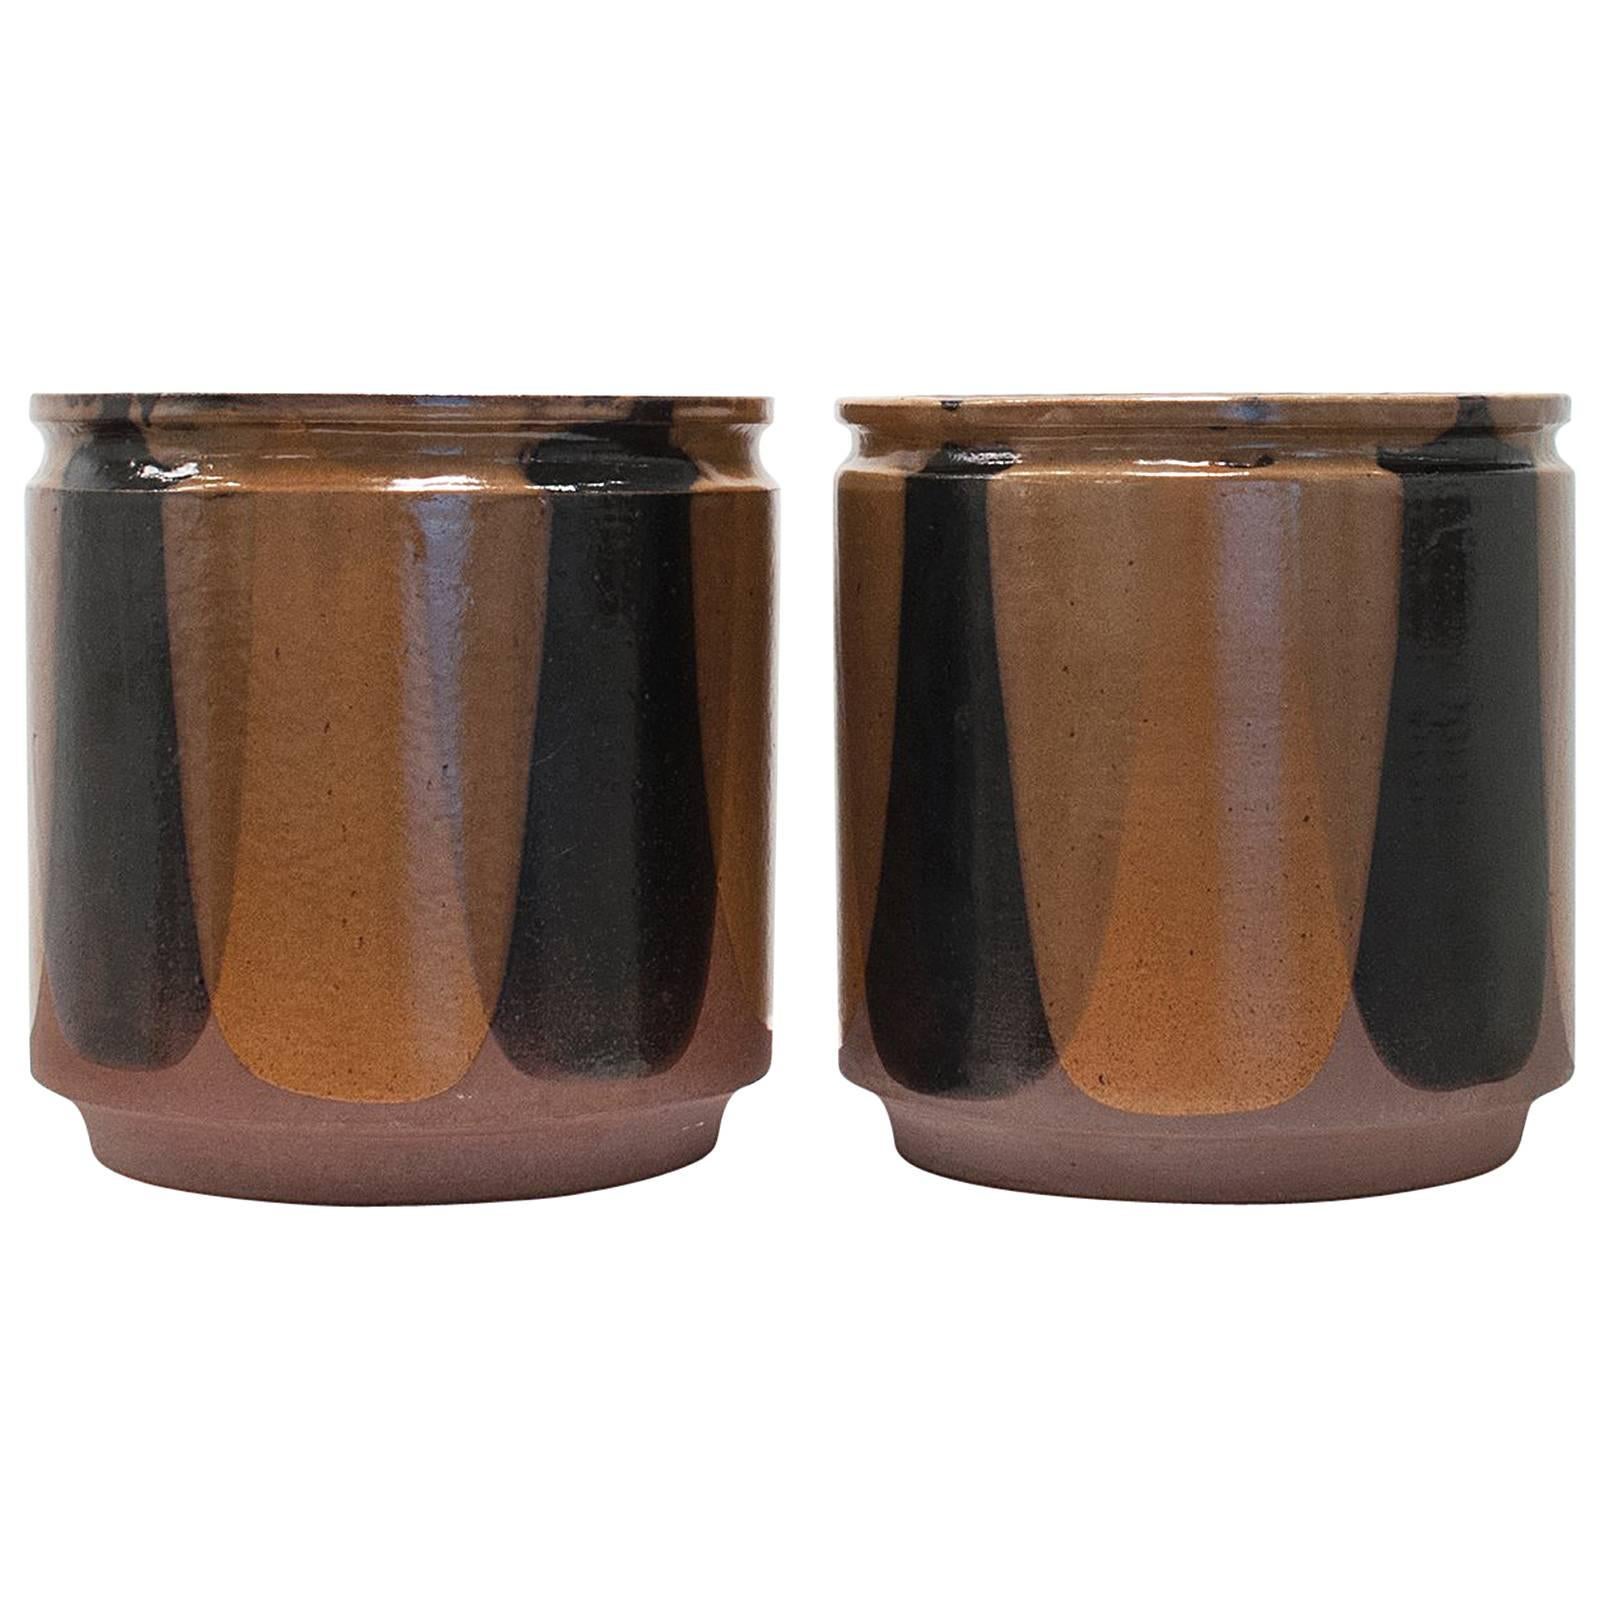 David Cressey and Robert Maxwell 'Flame' Glaze Design Ceramic Planters, 1970s For Sale